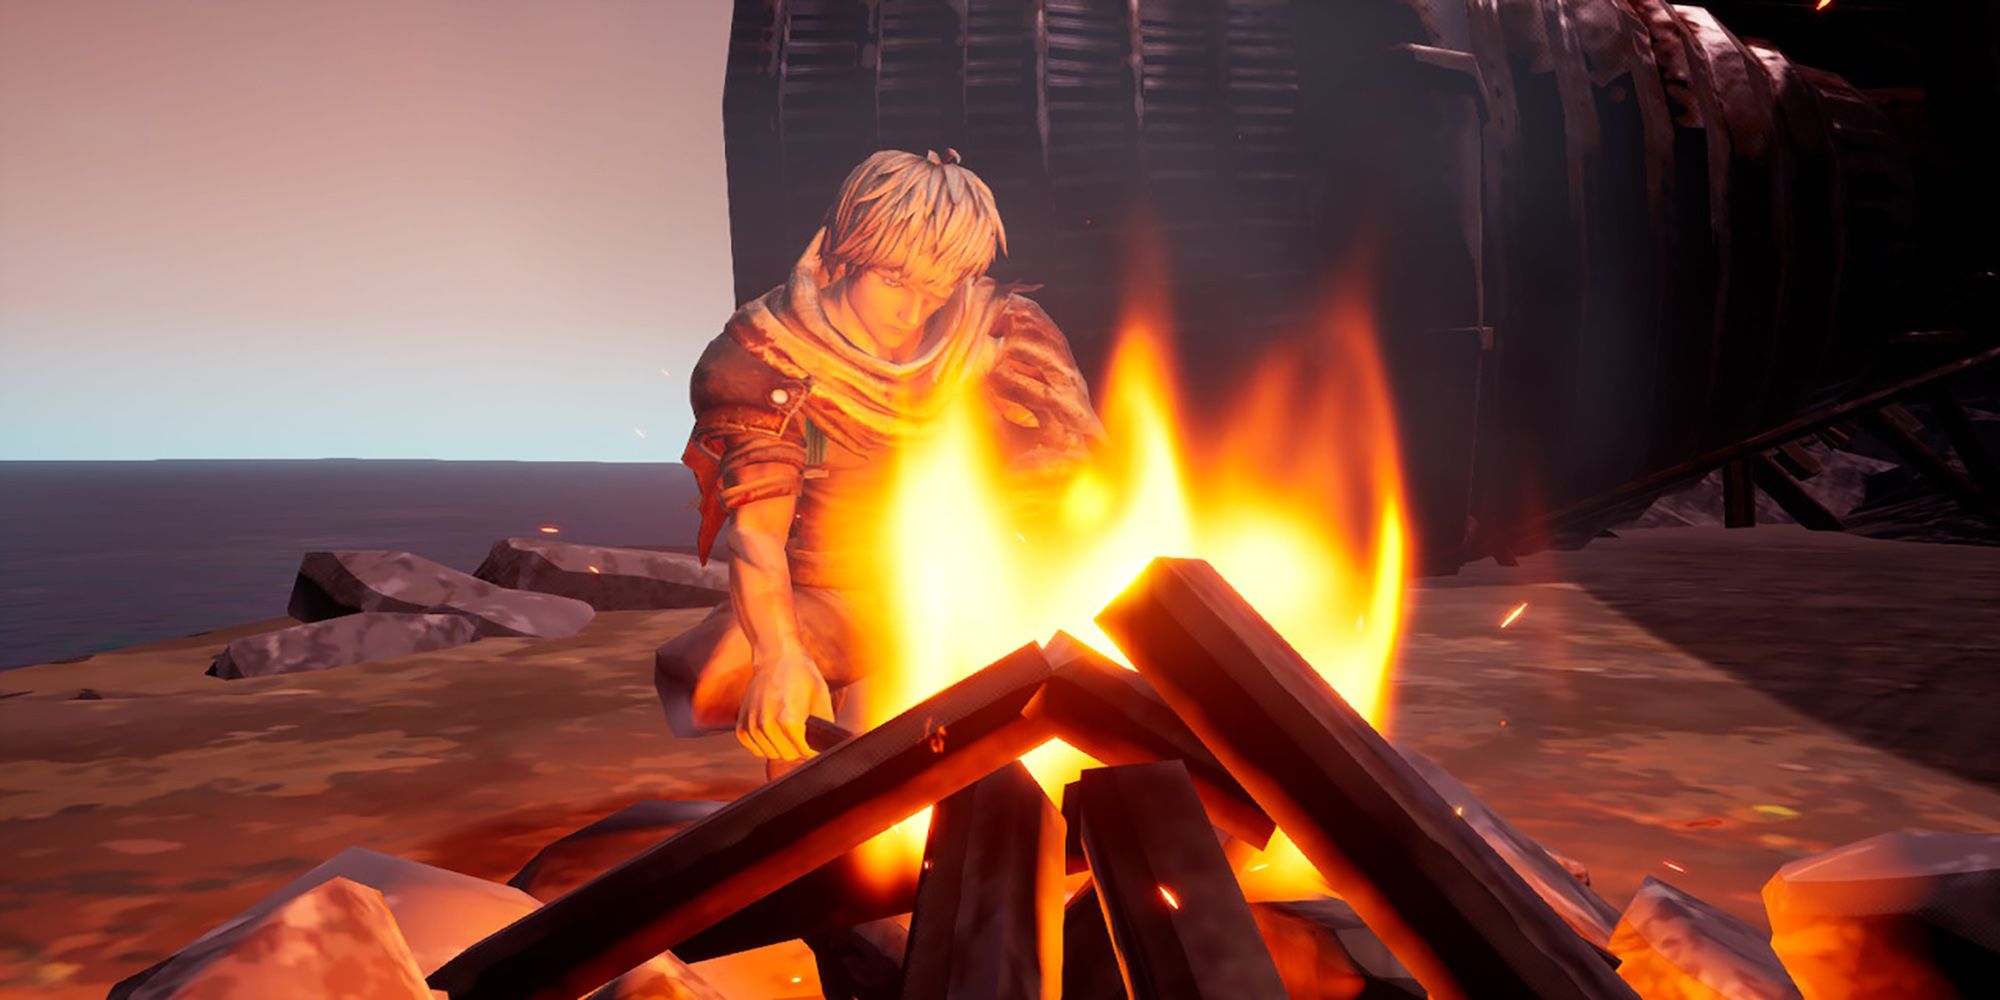 Reid cooks over an open fire at his home base in Deadcraft.